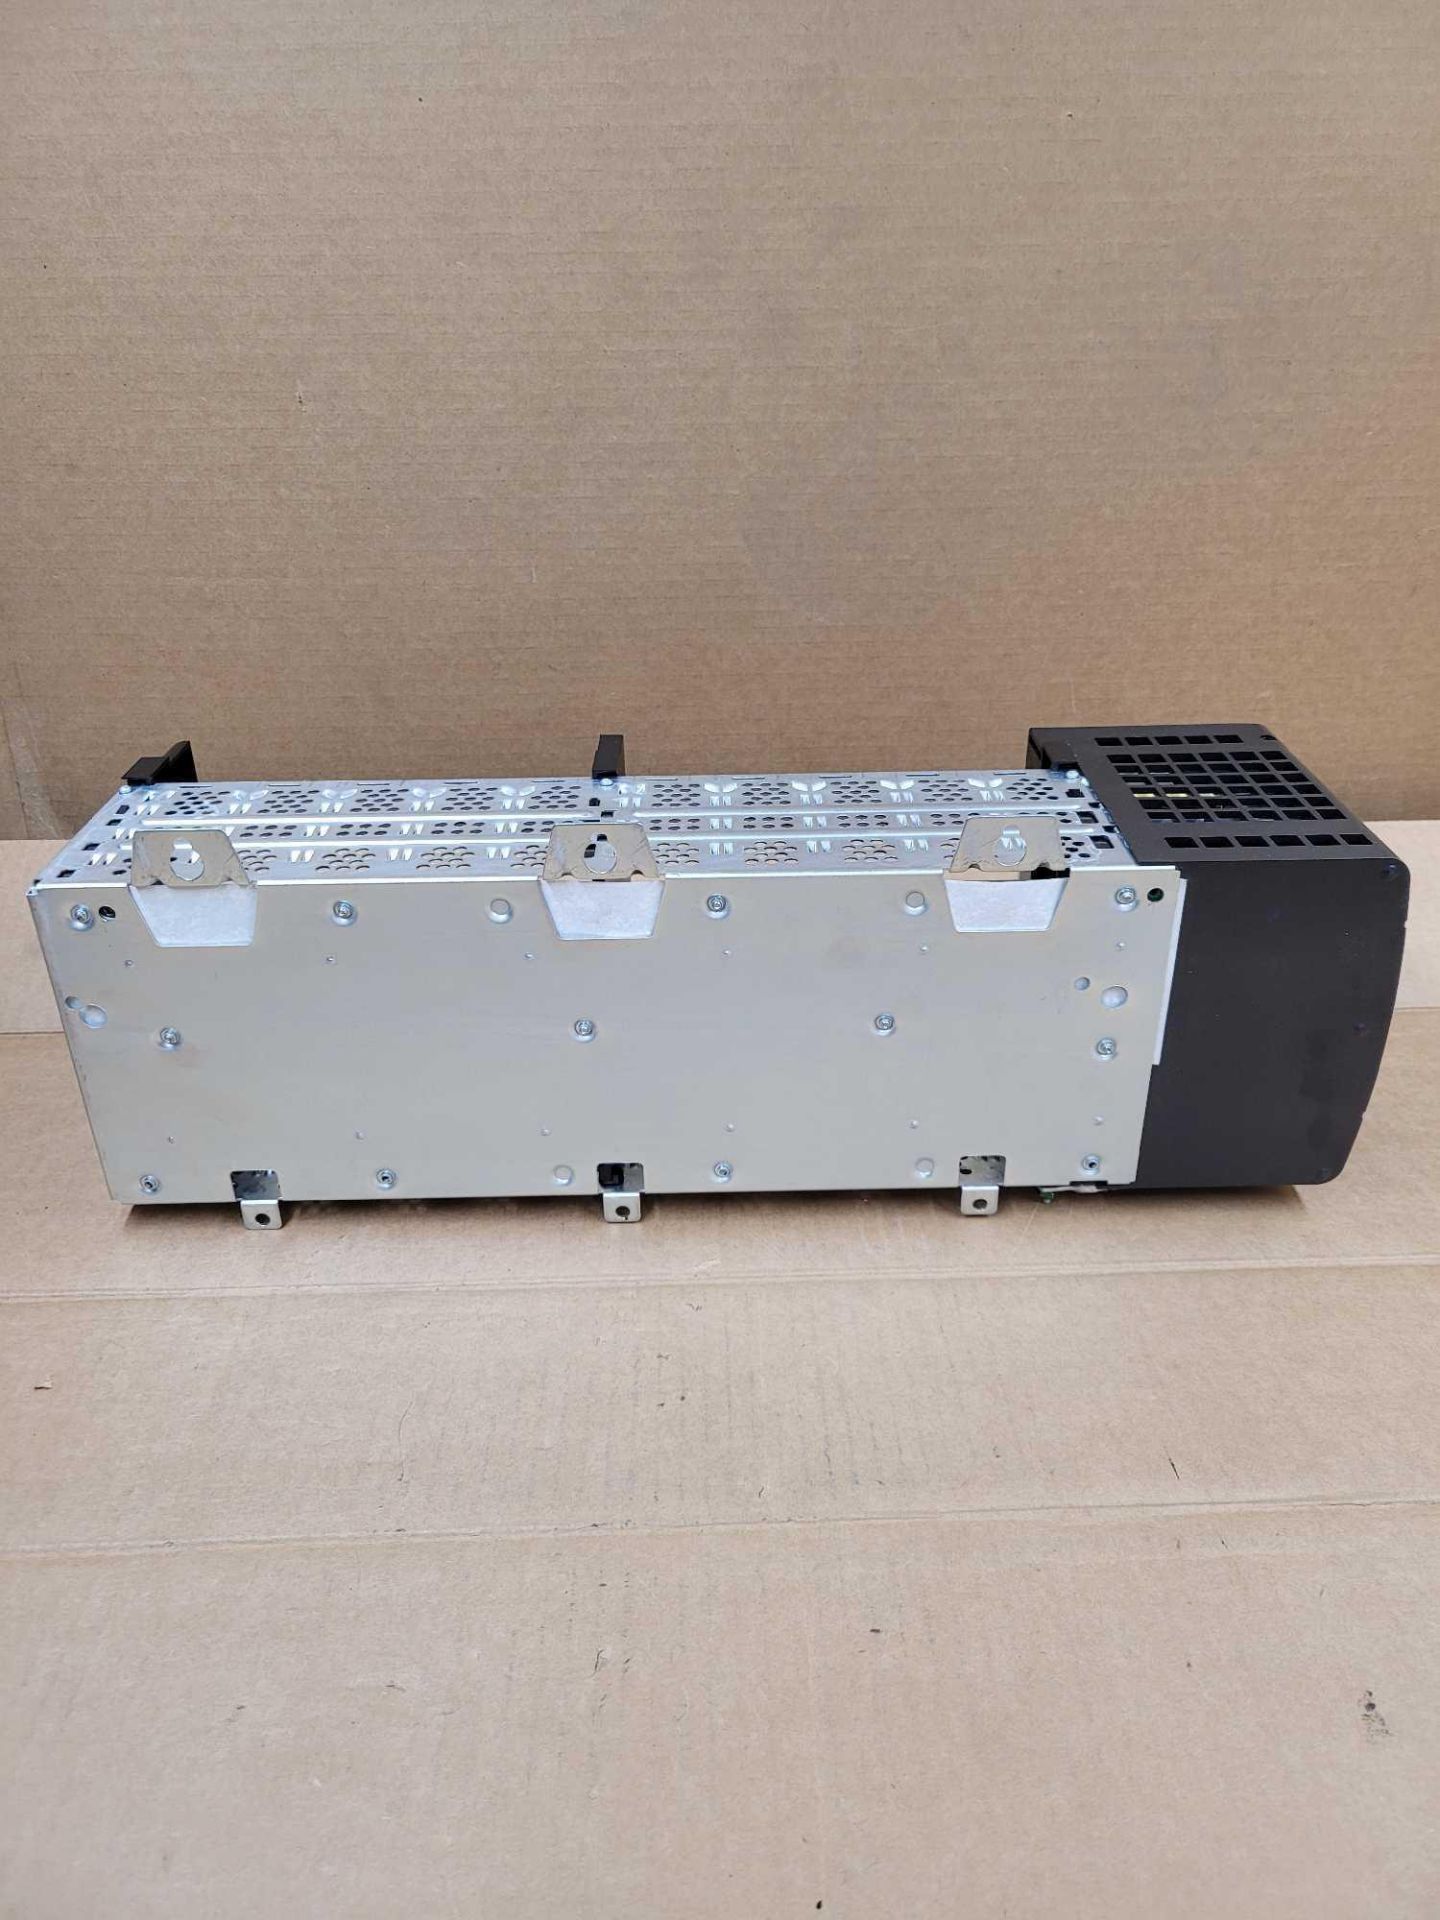 ALLEN BRADLEY 1756-PA75 with 1756-A10 / Series B Power Supply with Series B 10 Slot Chassis  /  Lot - Image 9 of 13